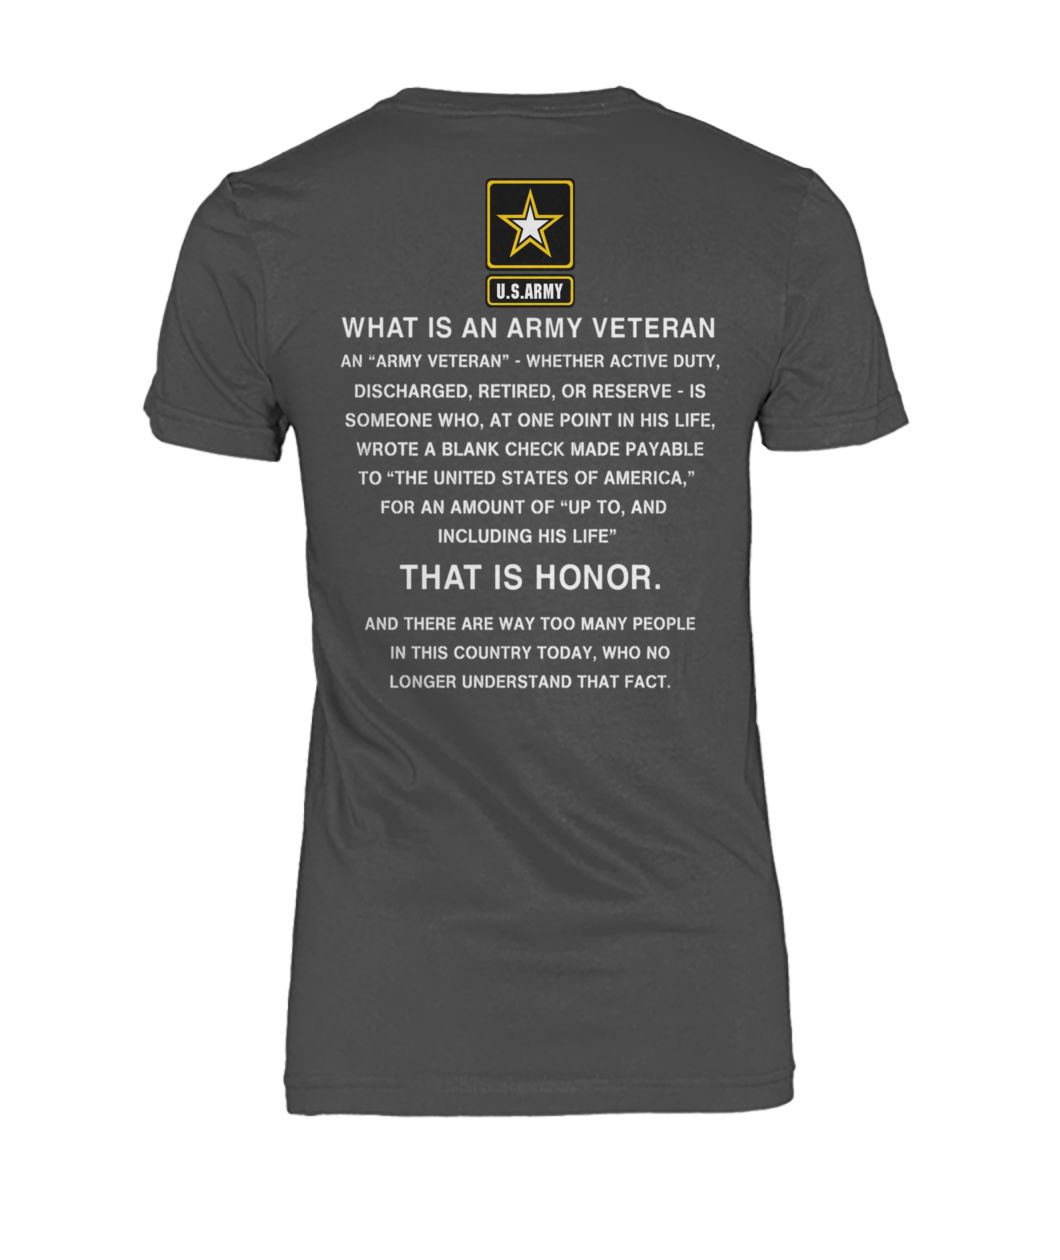 U.S.Army what is an army veteran that is honor women's crew tee